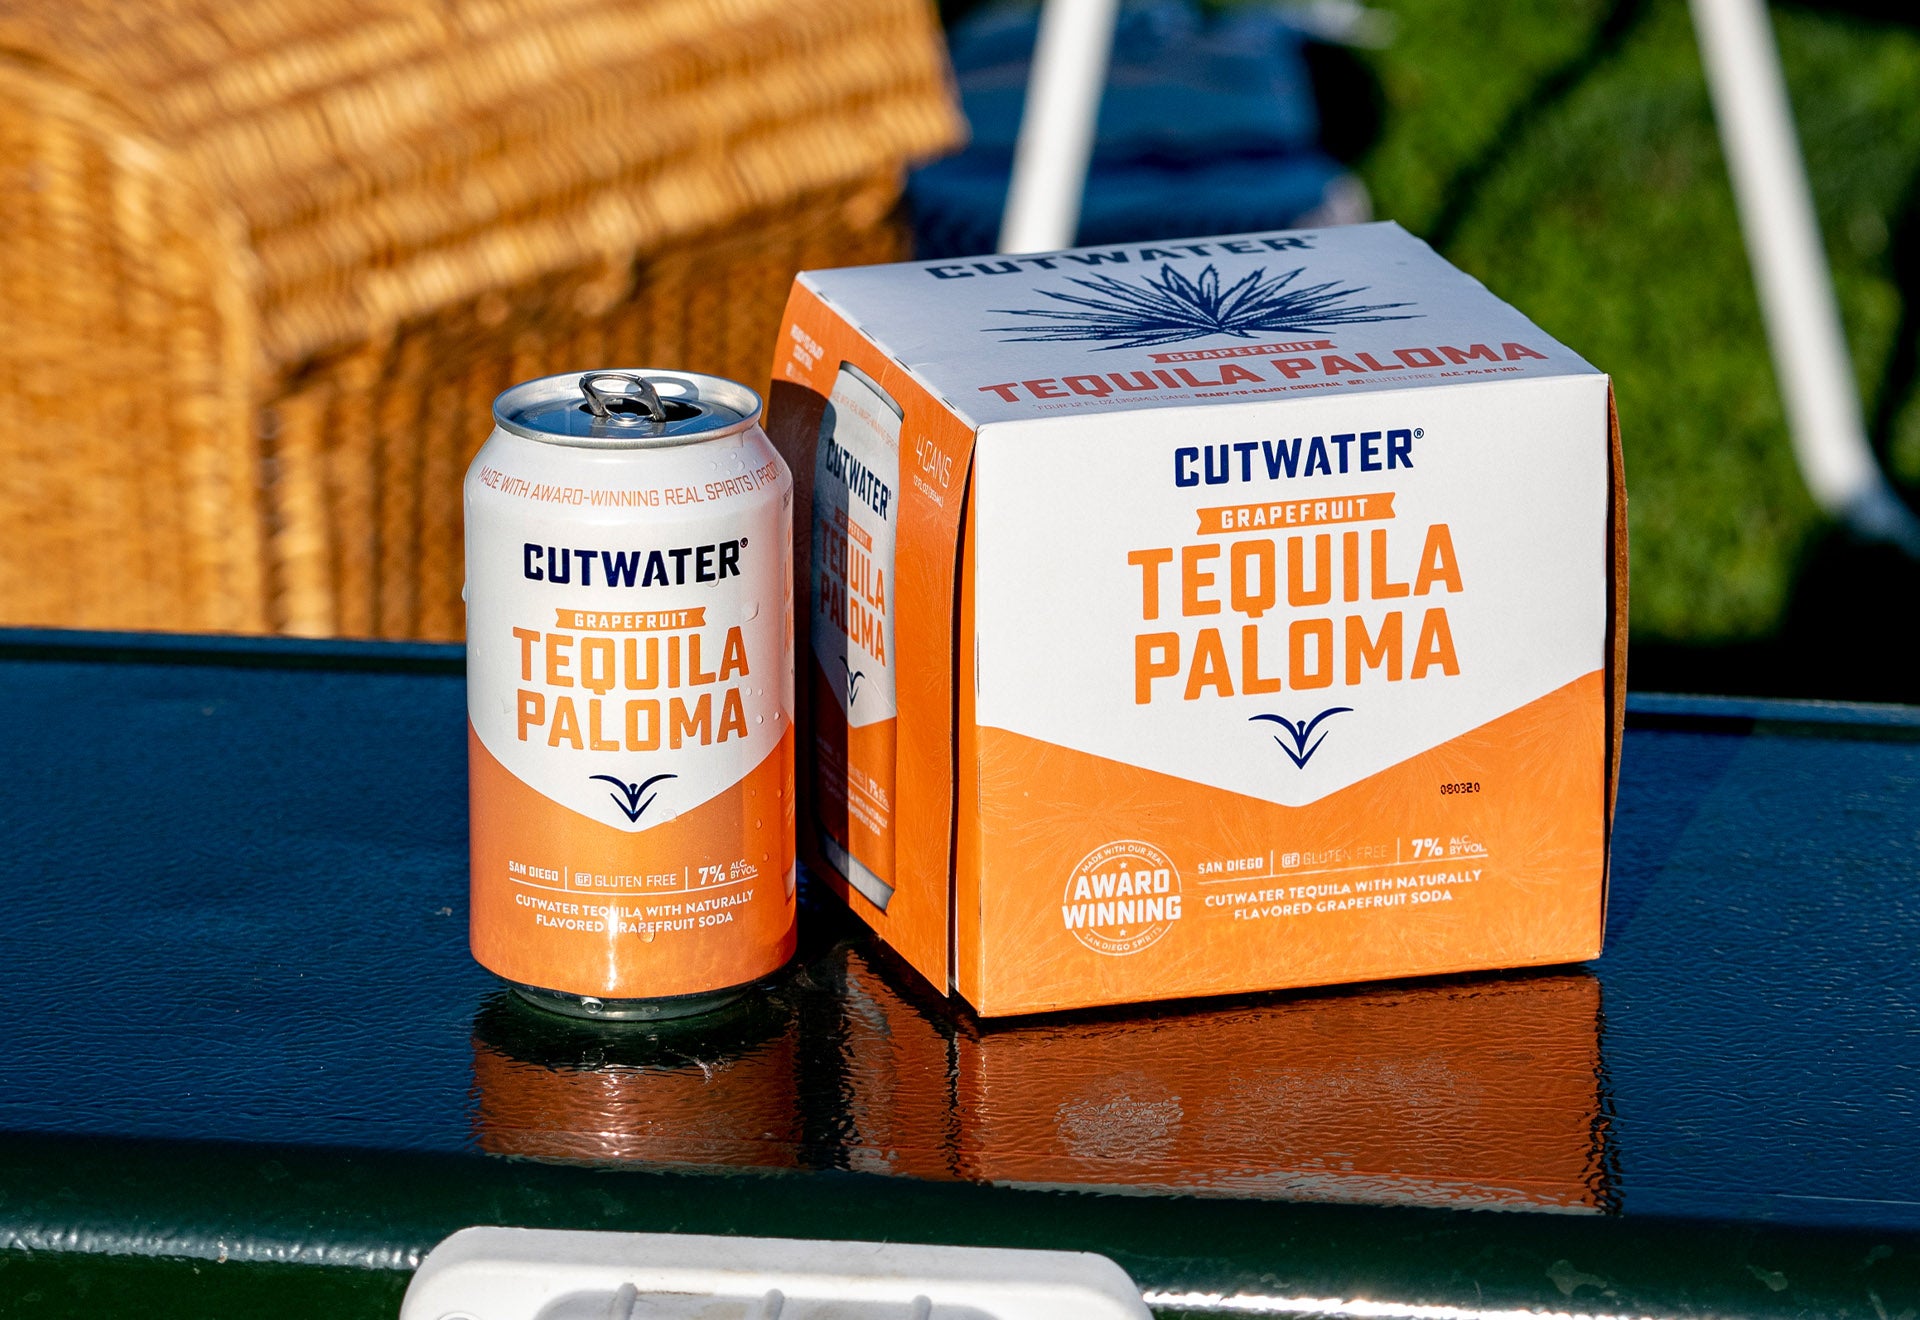 Cutwater Tequila Paloma 4 pack